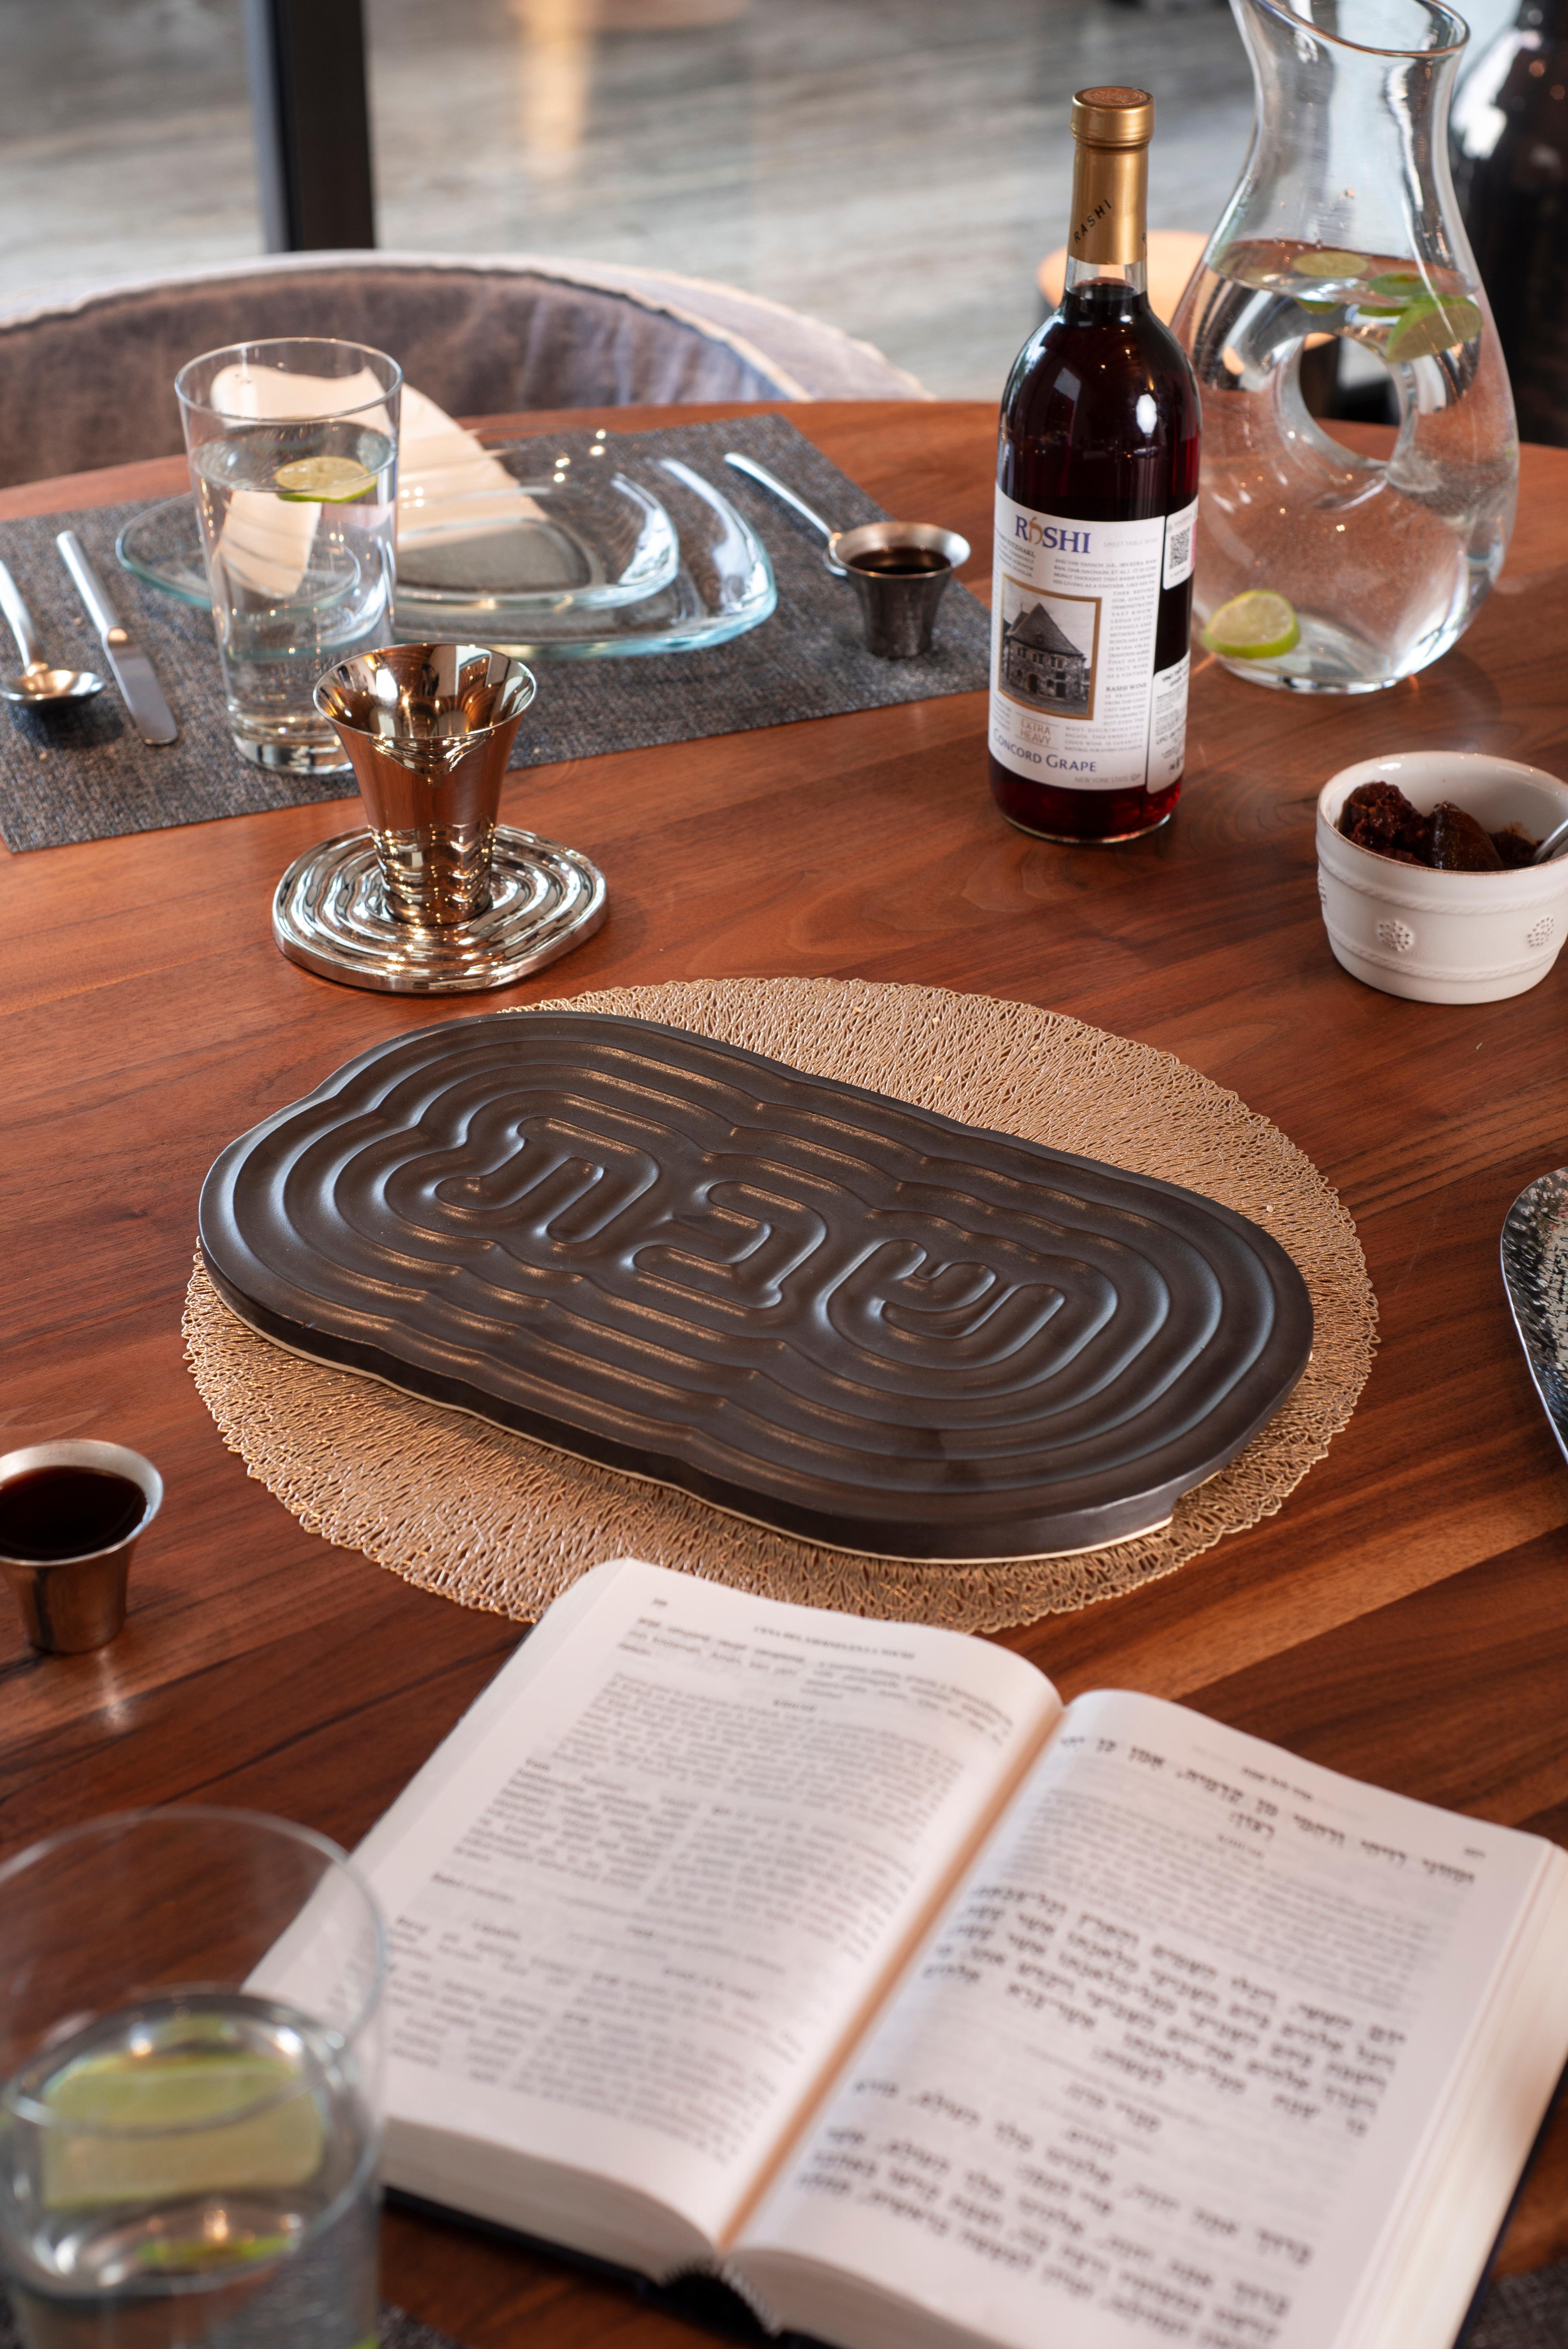 Introducing a masterpiece of Judaic artistry, the Bruci Shabbat Tray is a true testament to the essence of Shabbat. Embodying the timeless Jewish values of creation and light, this exquisite ceramic tray is the perfect way to bring sanctity to your